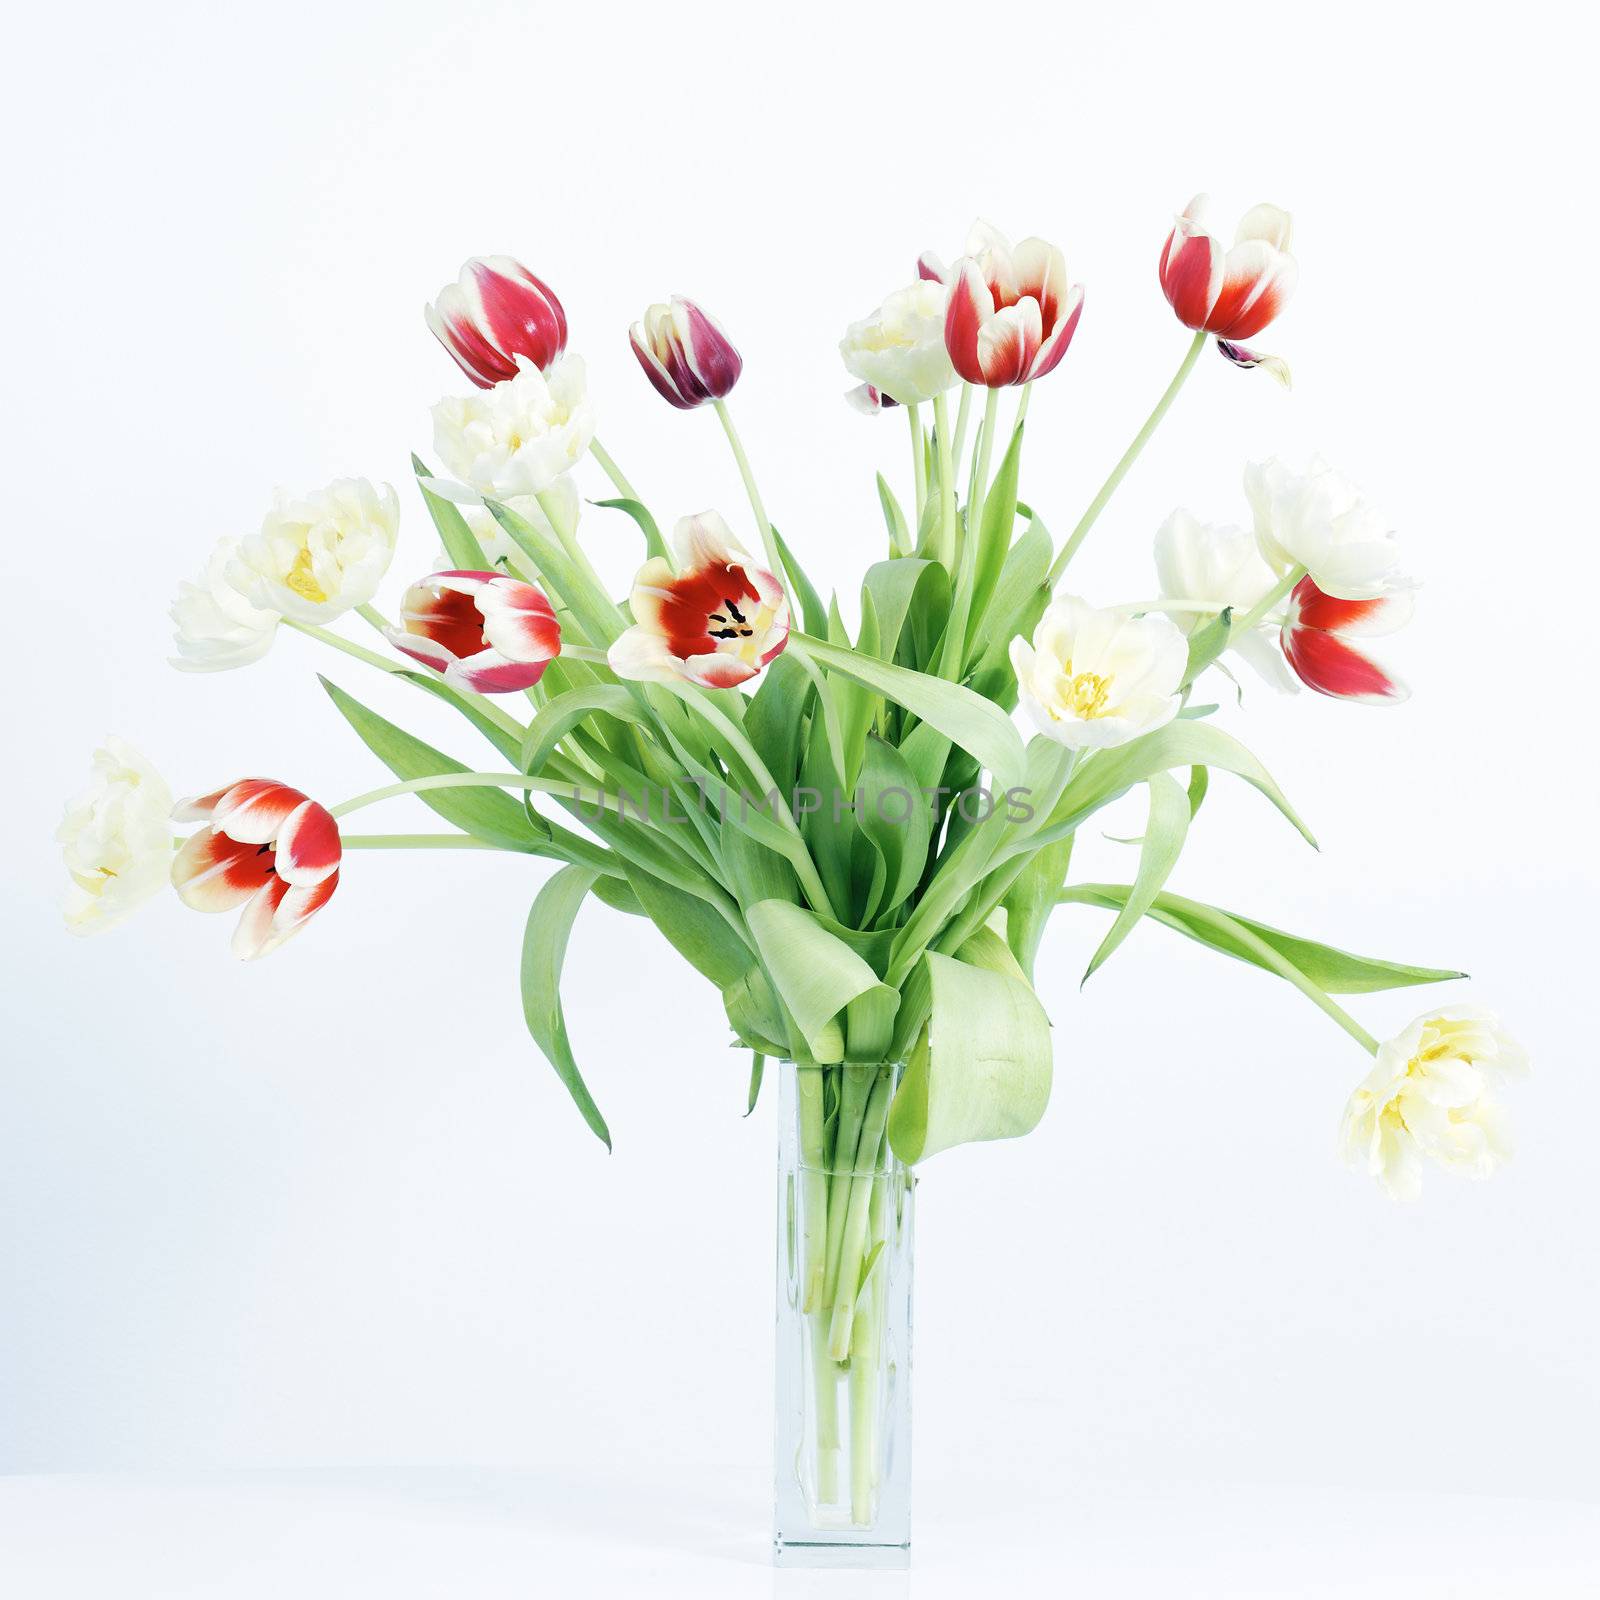 Beautiful red and yellow tulips on white background